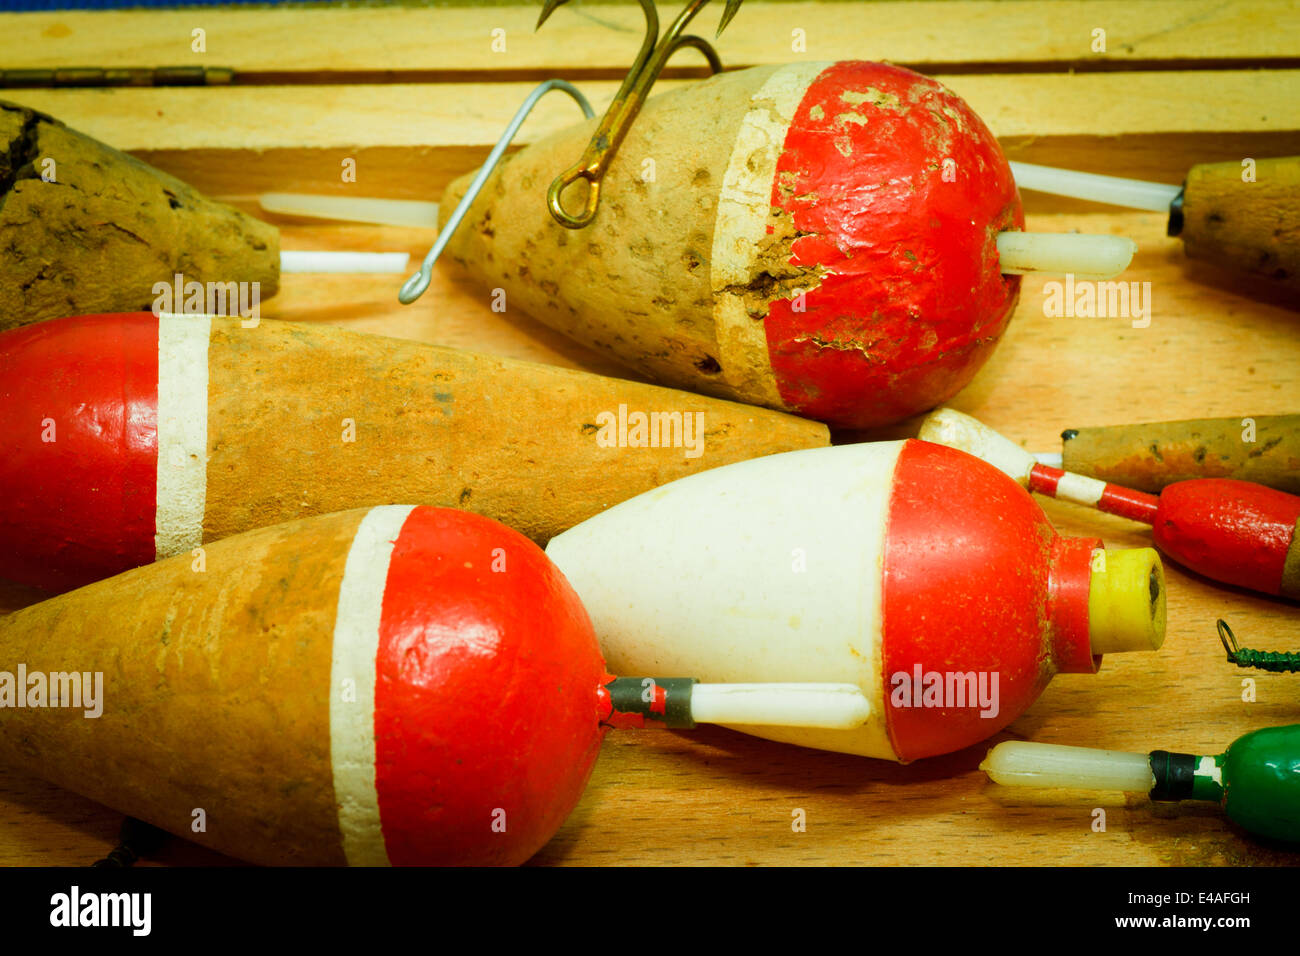 https://c8.alamy.com/comp/E4AFGH/old-fishing-buoys-and-fishhooks-on-wooden-background-E4AFGH.jpg